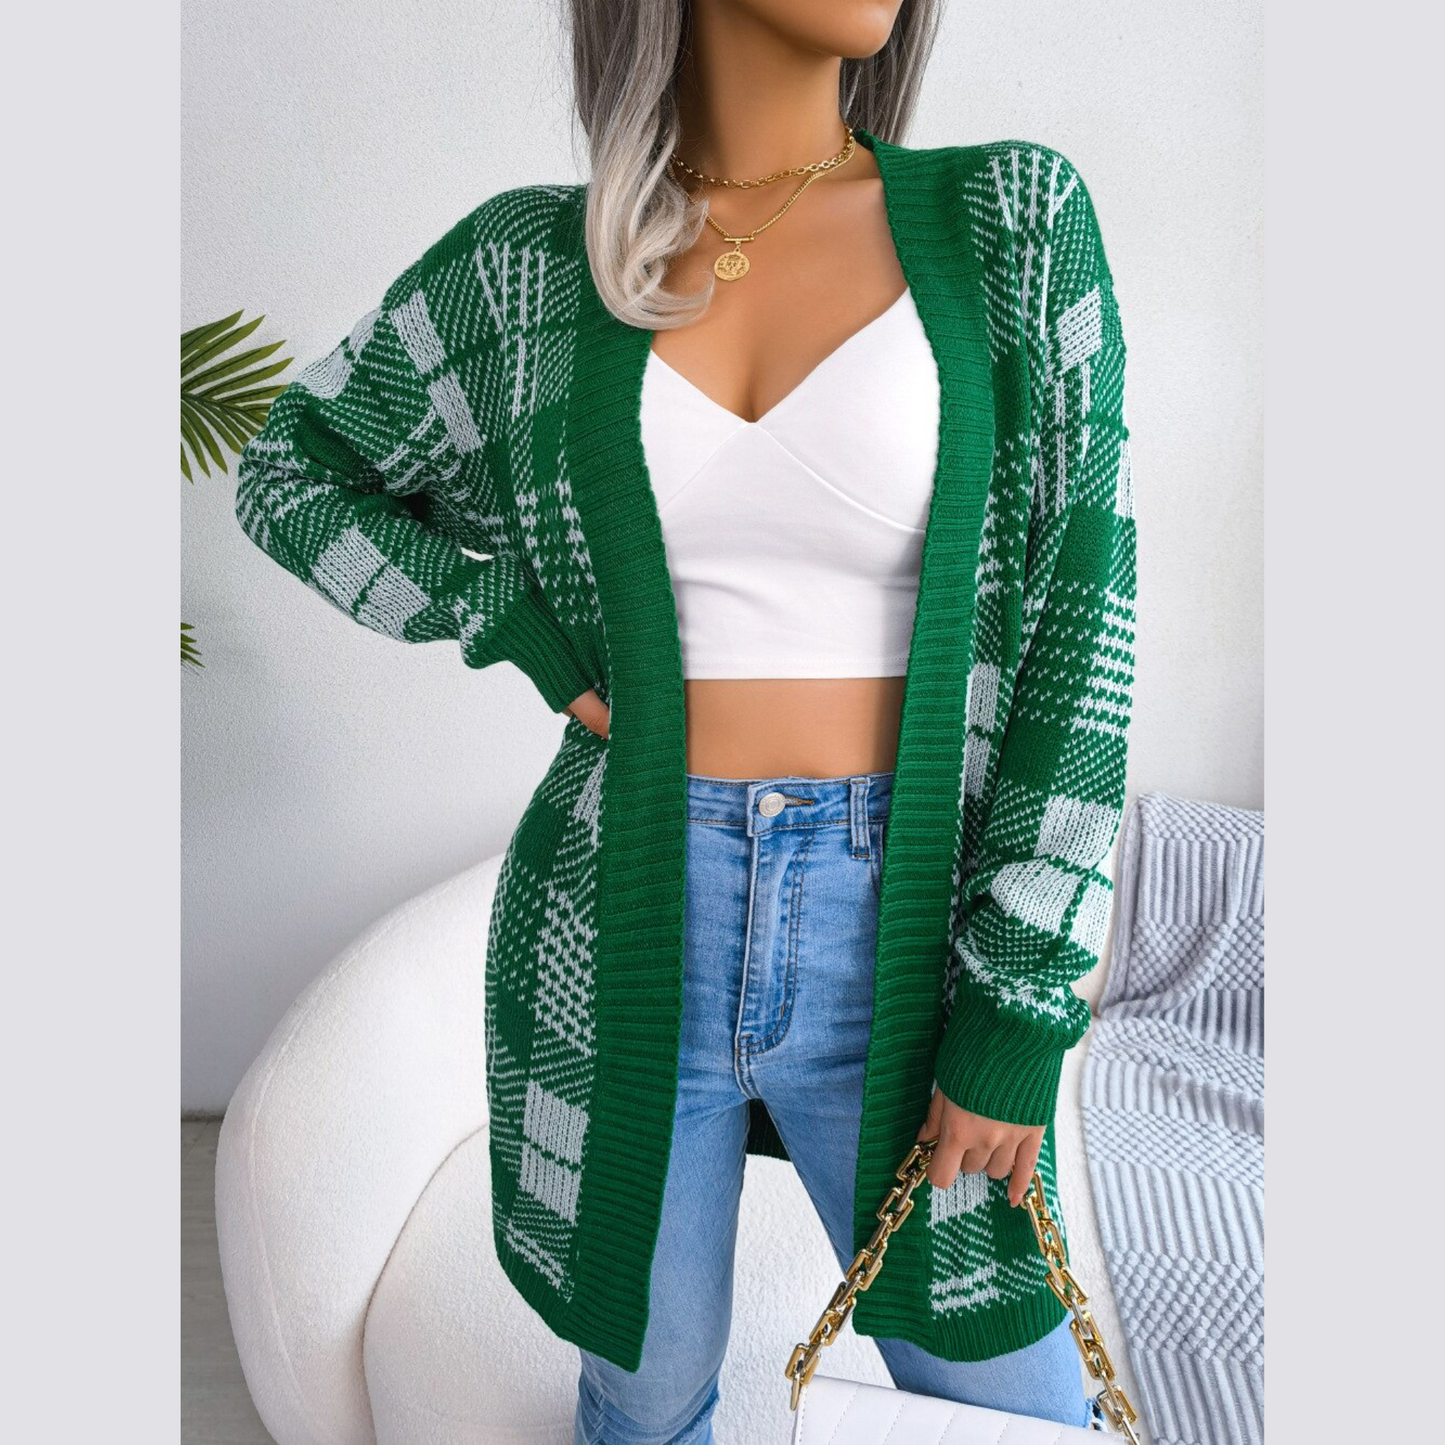 Lana - Green Knitted Plaid Belted Cardigan